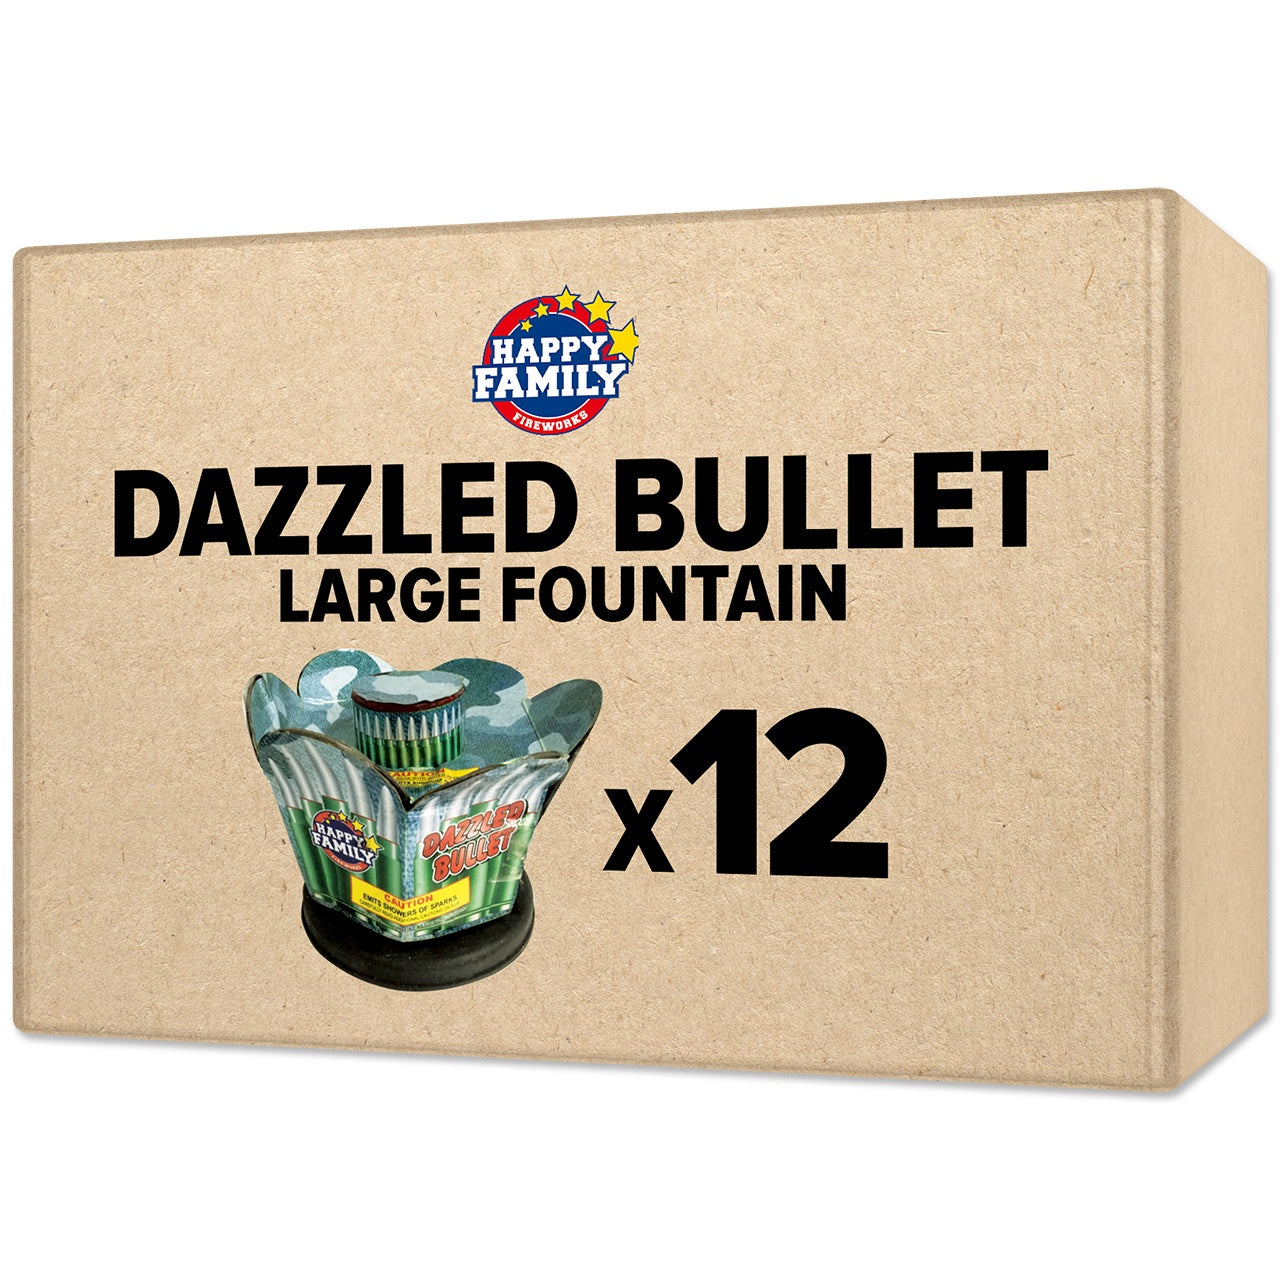 Dazzled Bullet Large Fountain